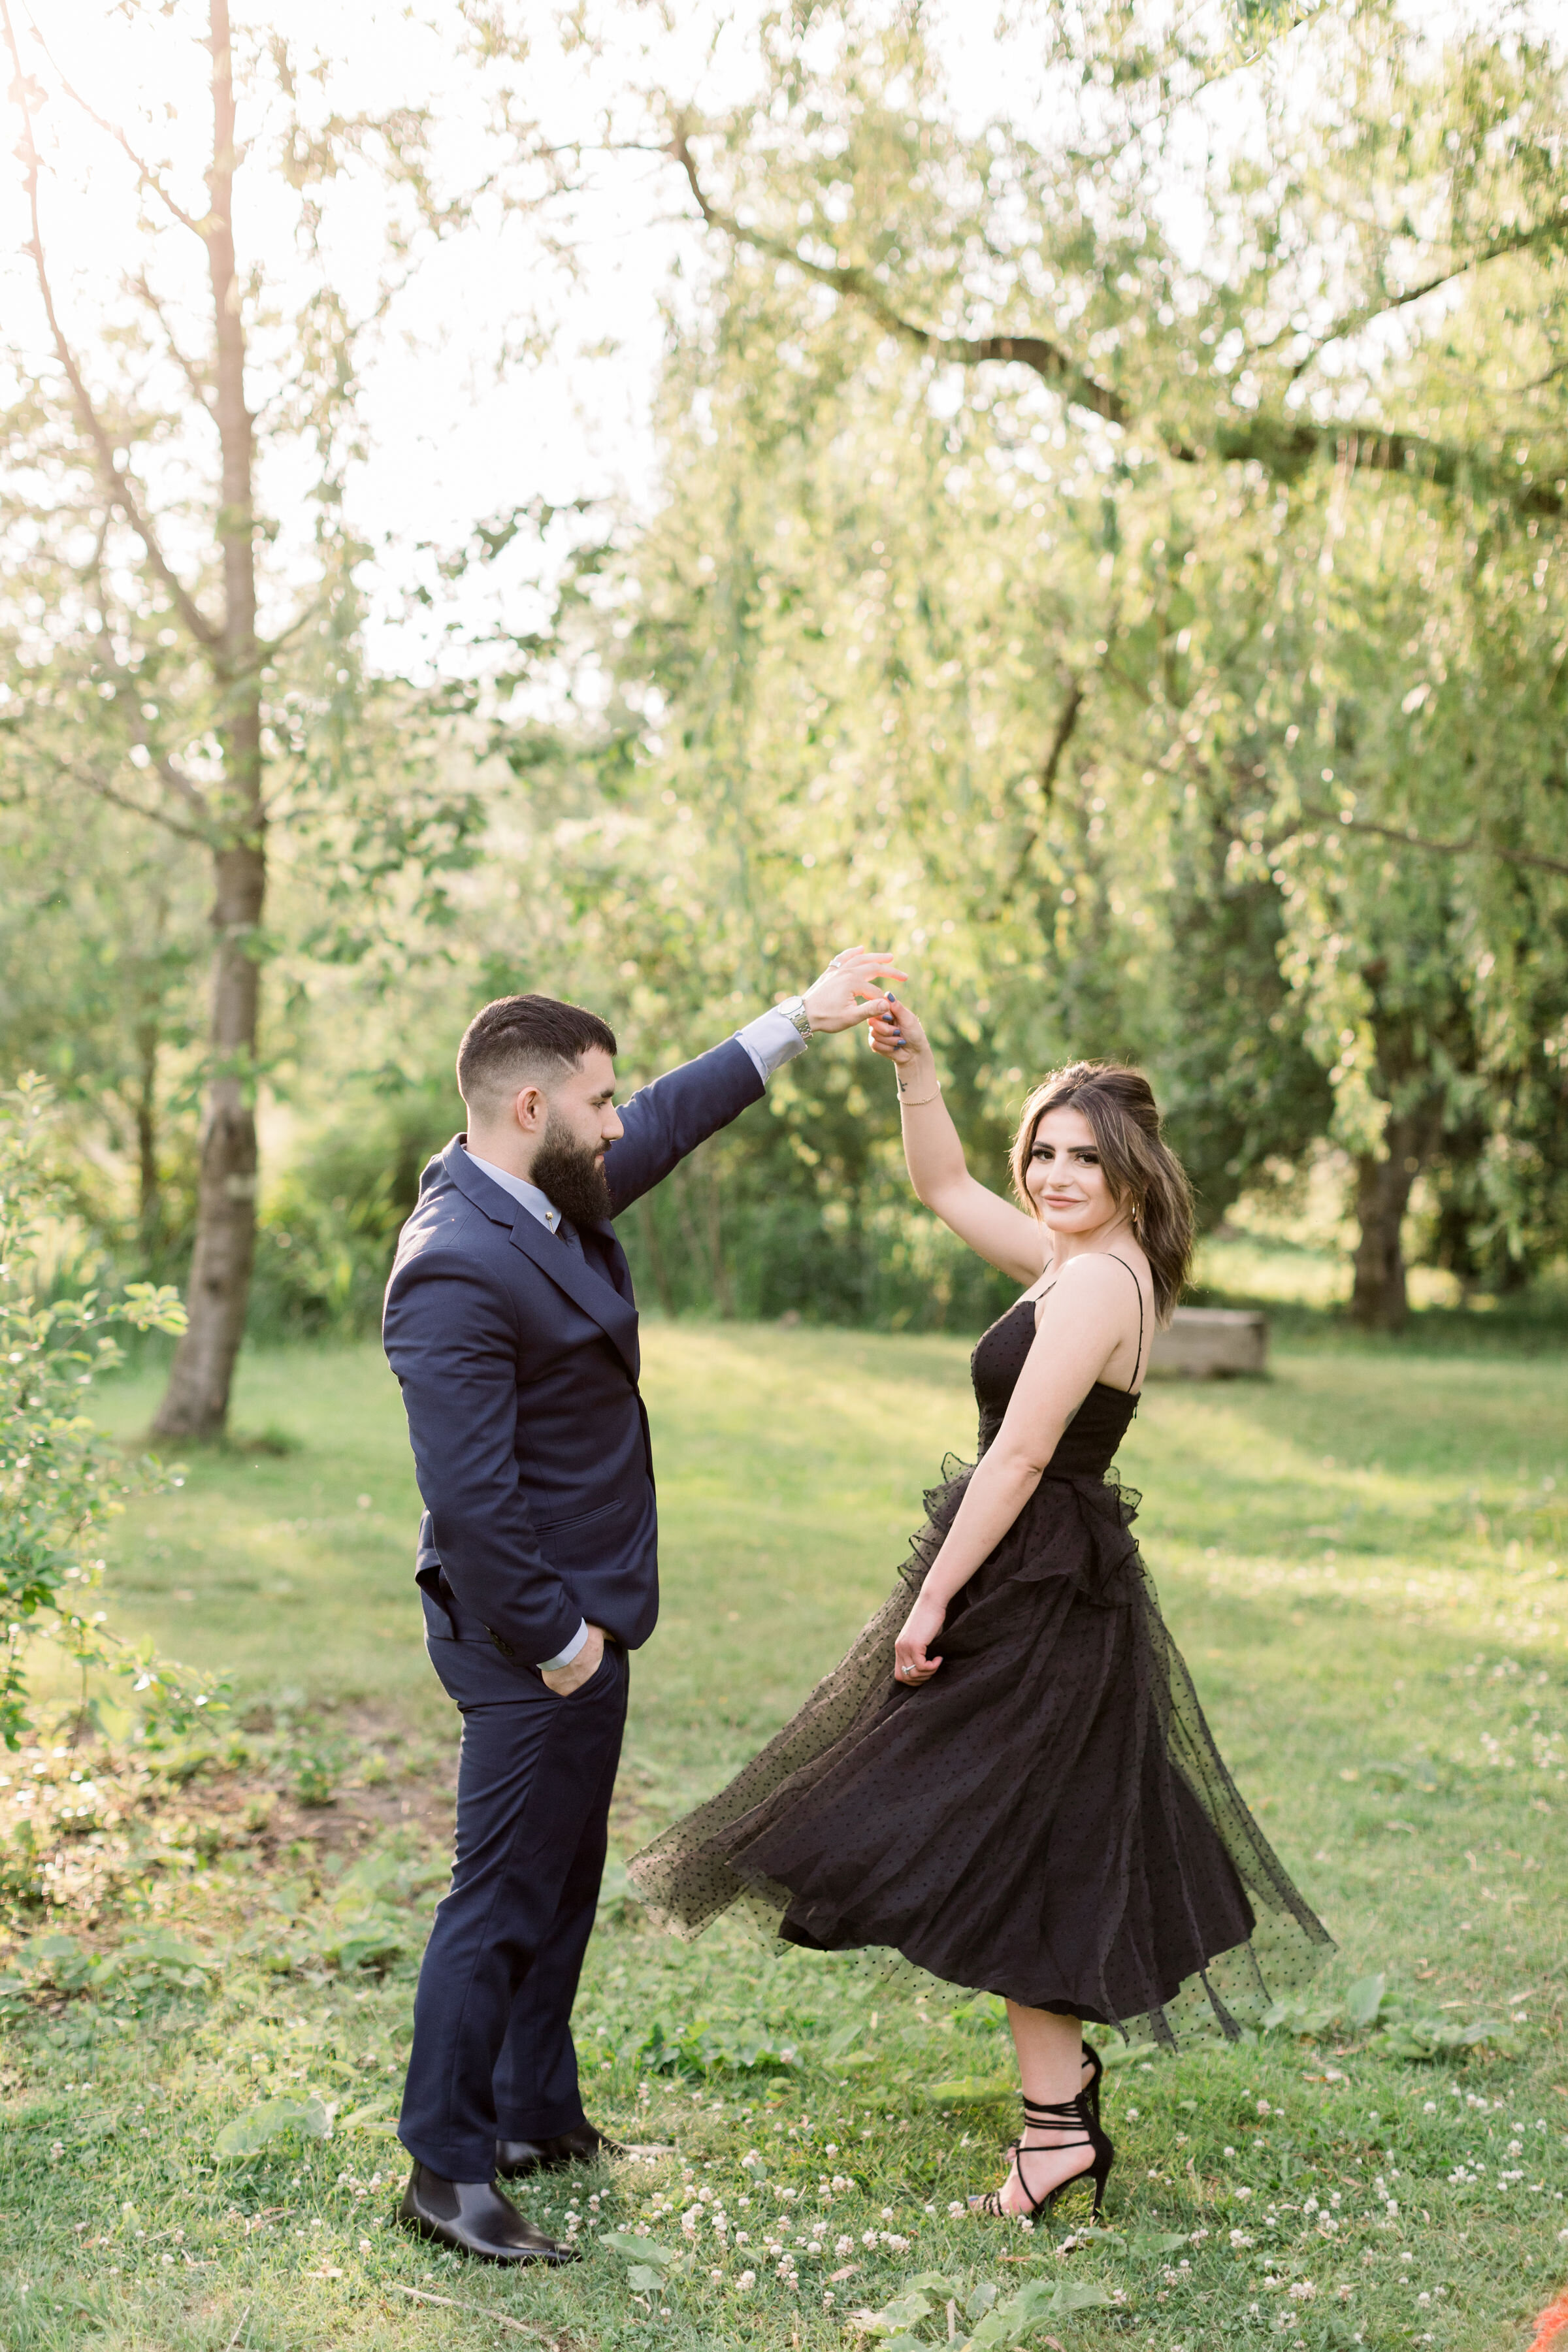  During this formal engagement shoot in Ottawa, Ontario, Chelsea Mason Photography captures this soon-to-be groom twirl his fiancé. twirling dancing engagement formal session Ottawa Ontario couples photographer #ChelseaMasonPhotography #OttawaOntario